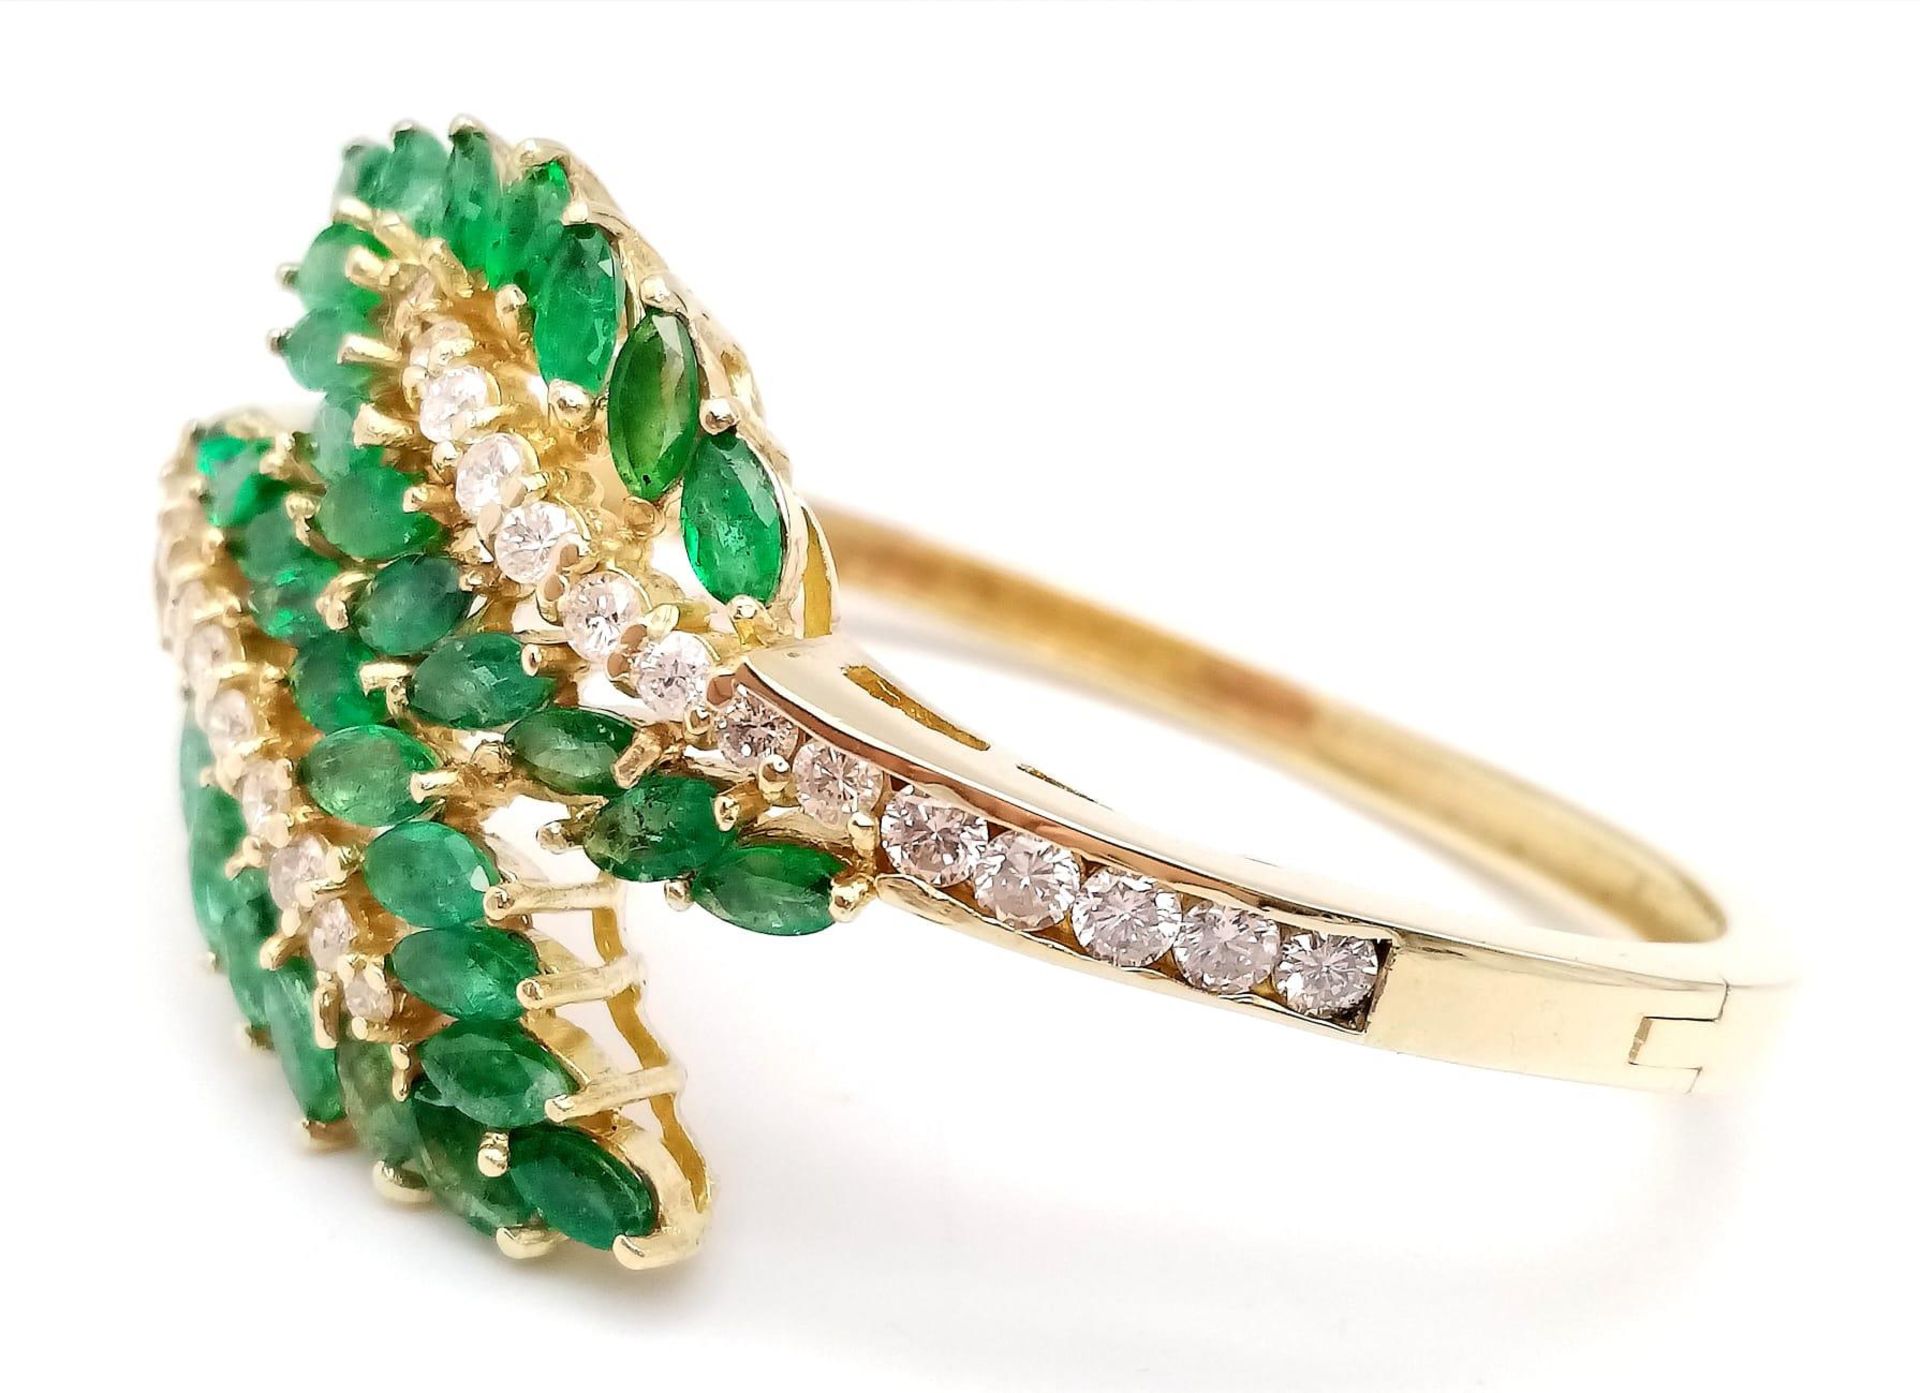 A DIAMOND AND EMERALD LEAF DESIGN BANGLE IN CROSSOVER STYLE SET IN18K GOLD . 33.5gms 10457 - Image 5 of 15